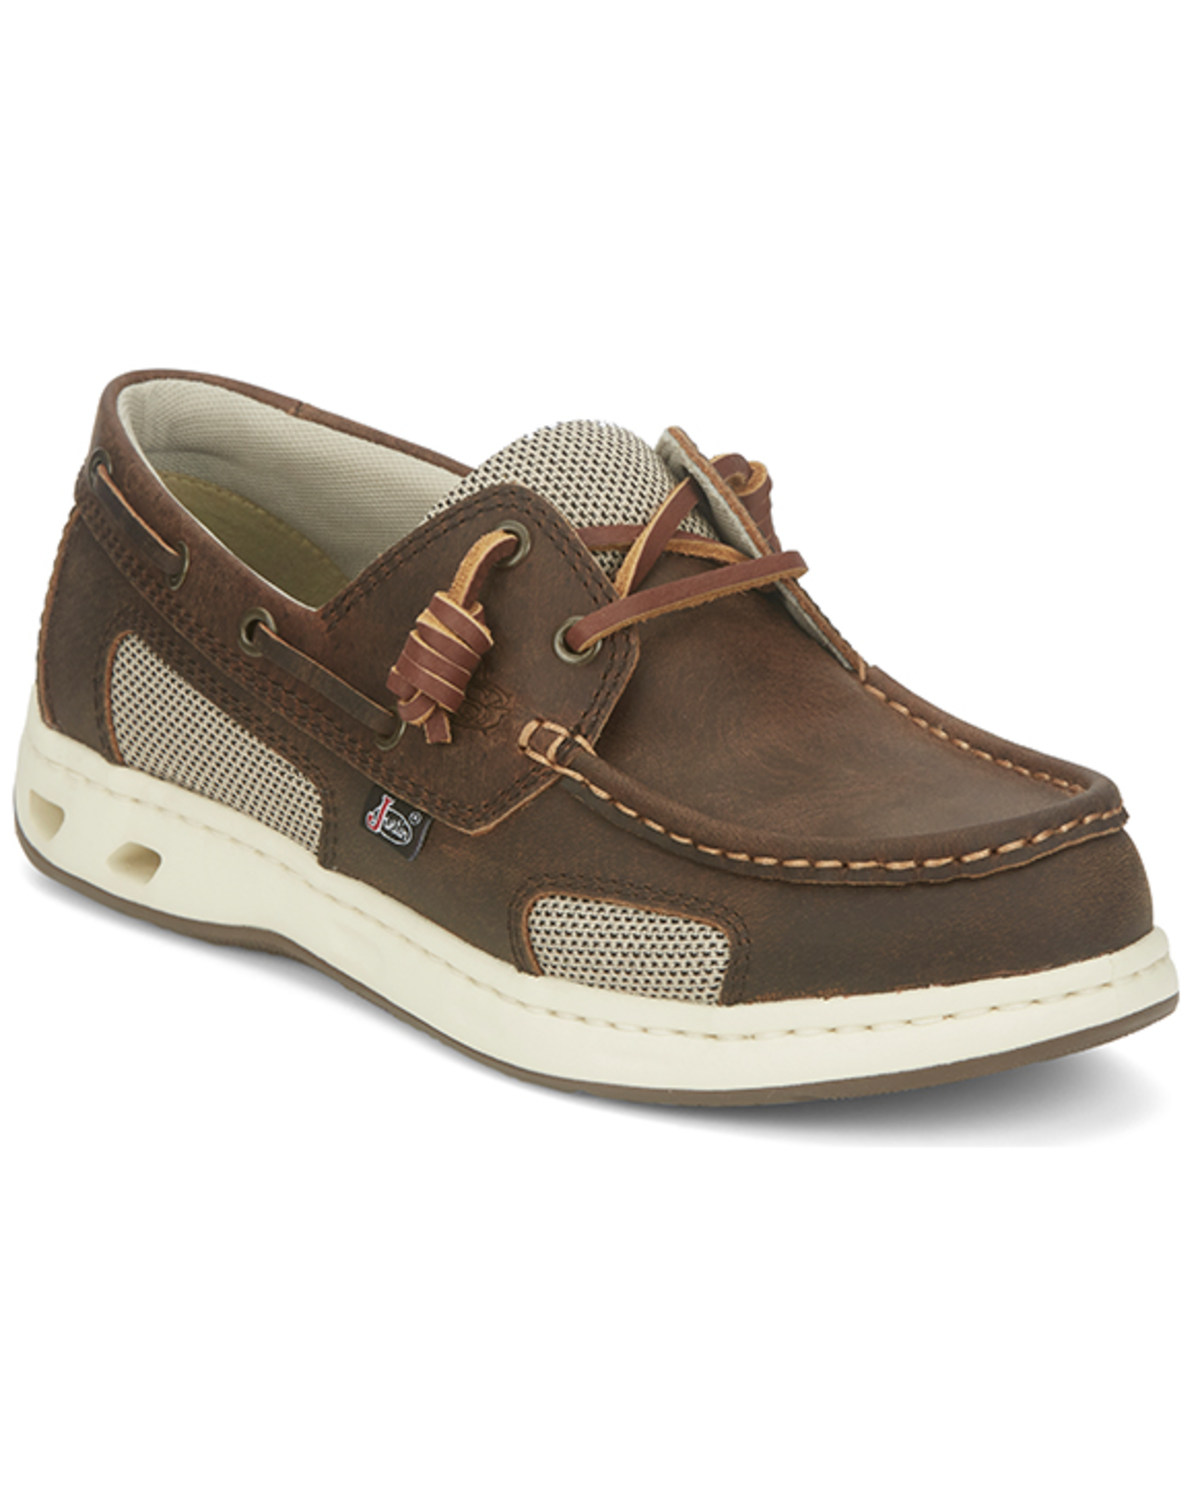 Justin Men's Angler Western Casual Shoes - Moc Toe